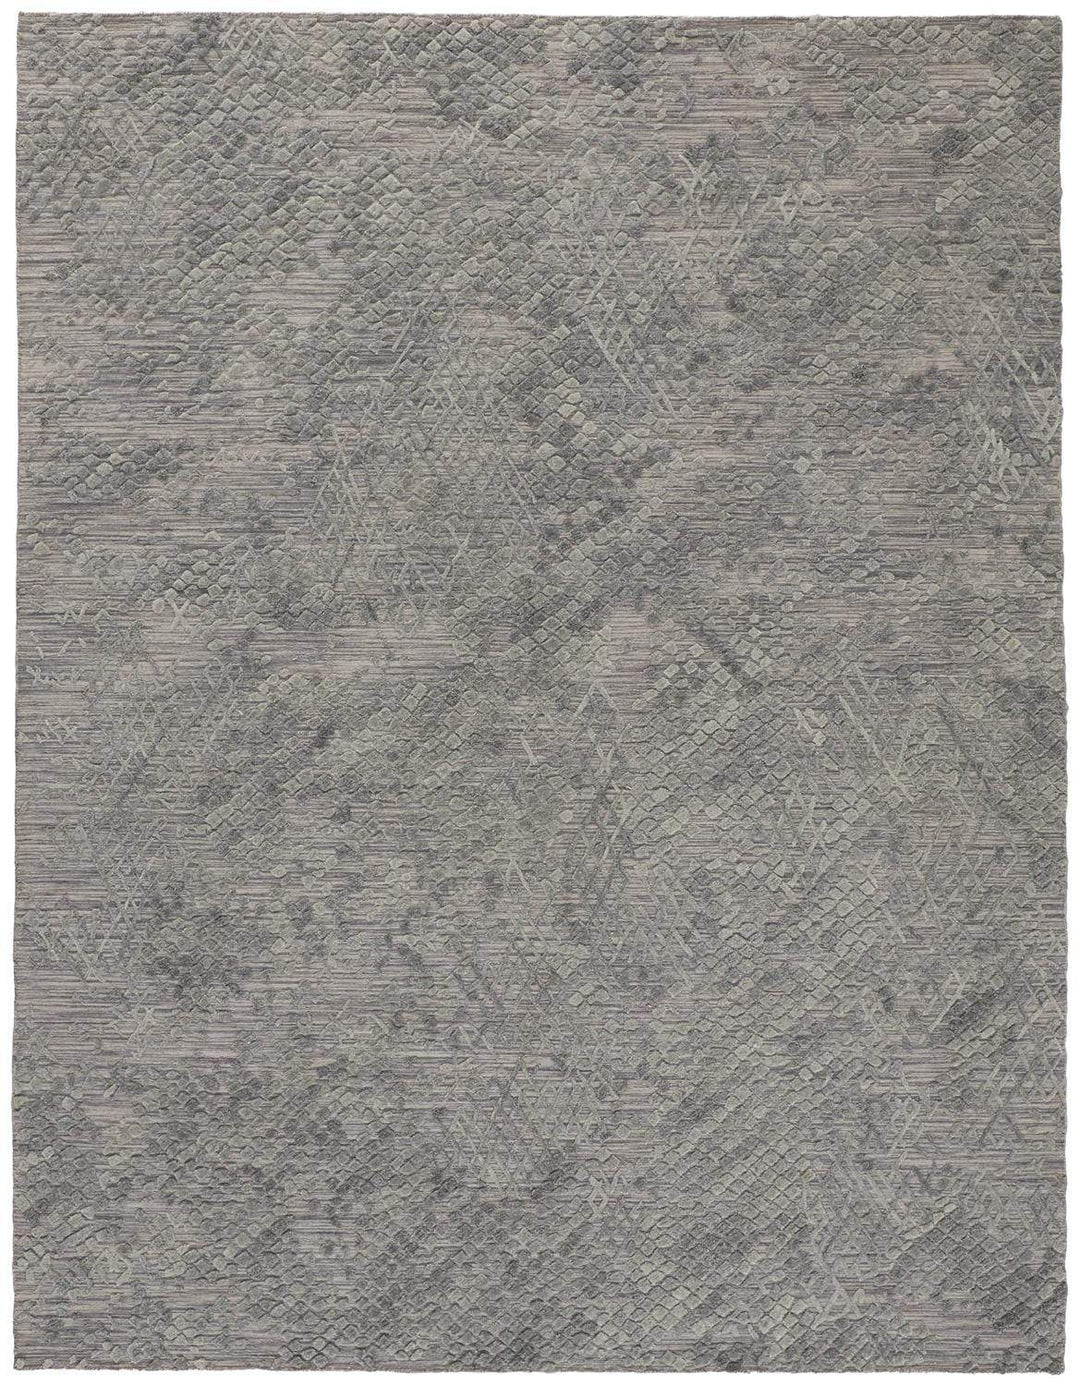 Feizy Feizy Elias Luxe Abstract High & Low Pile Rug - Oyster & Storm Gray - Available in 8 Sizes 3'-6" x 5'-6" ELS6716FGRYMLTC50